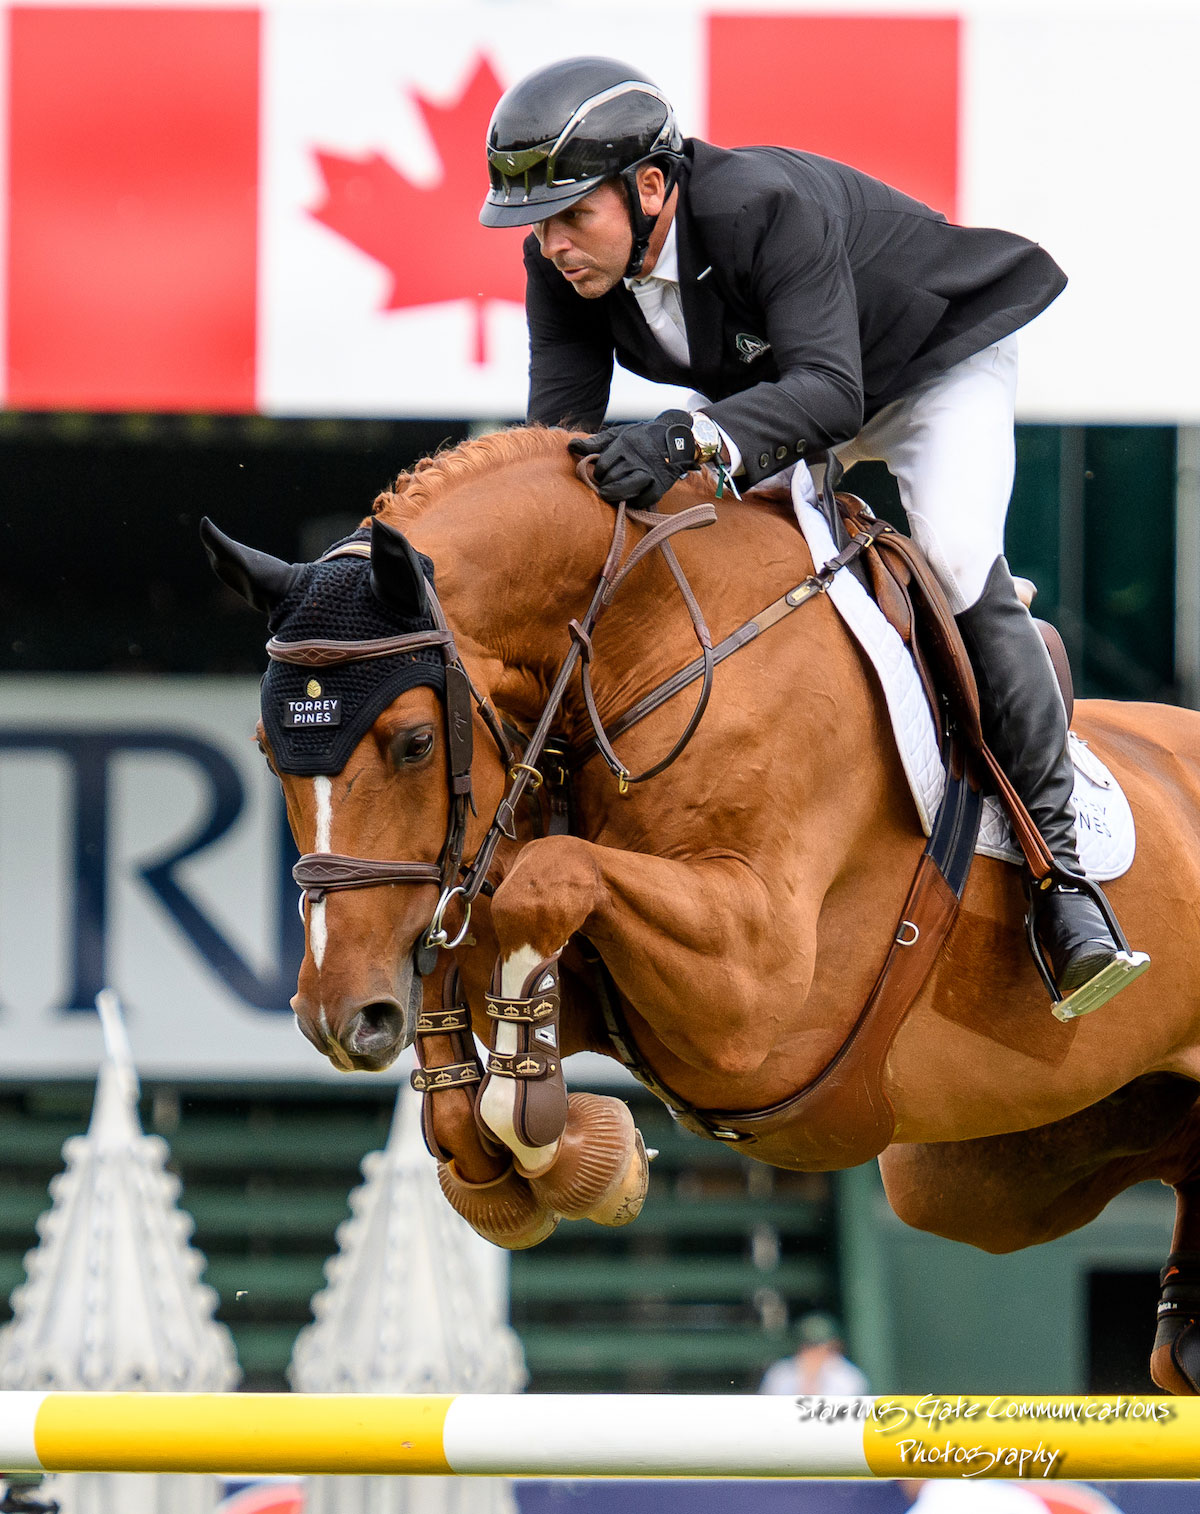 Eric Lamaze and Chacco Kid will represent the Canadian Show Jumping Team at the FEI World Equestrian Games from September 11 and 23 in Tryon, NC. Photo by Starting Gate Communications